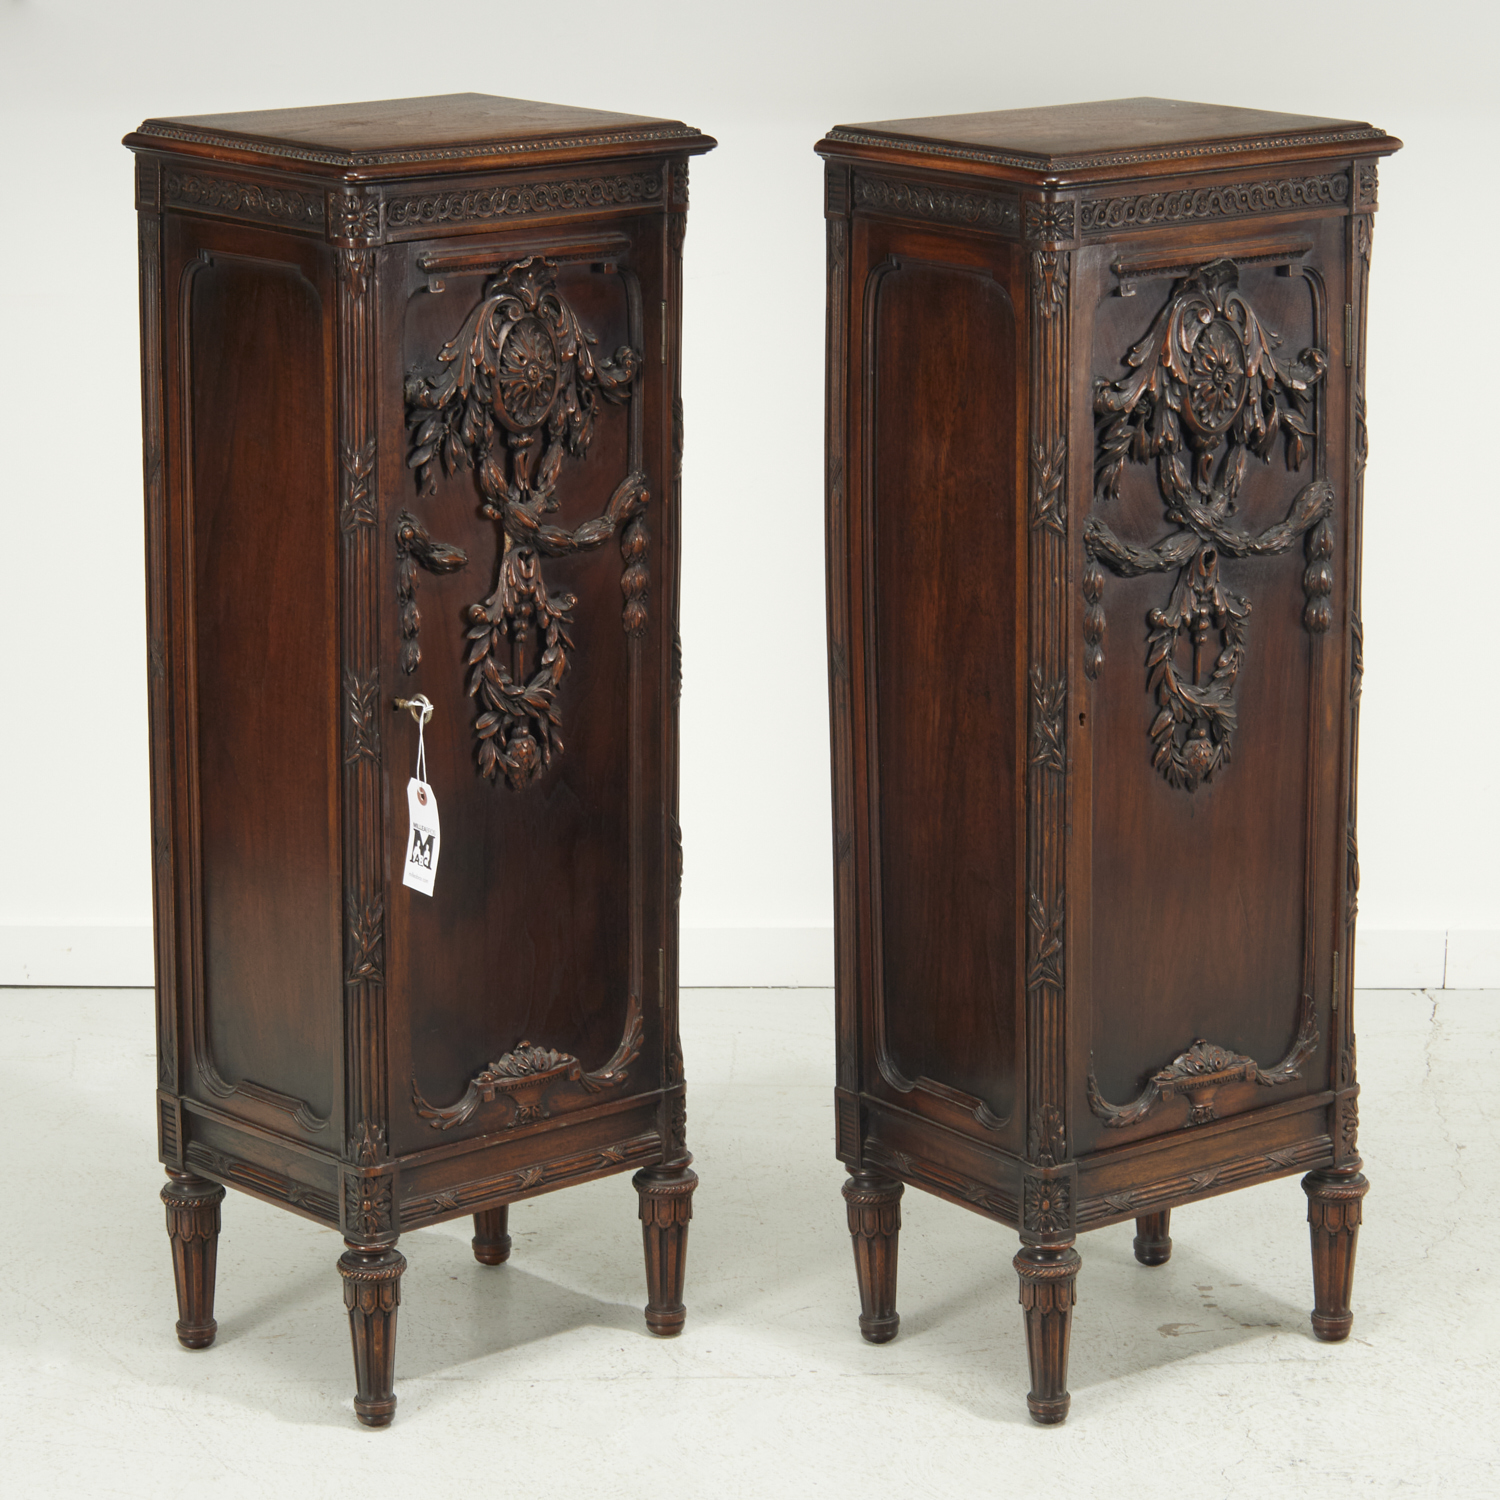 PAIR LOUIS XVI STYLE SIDE CABINETS